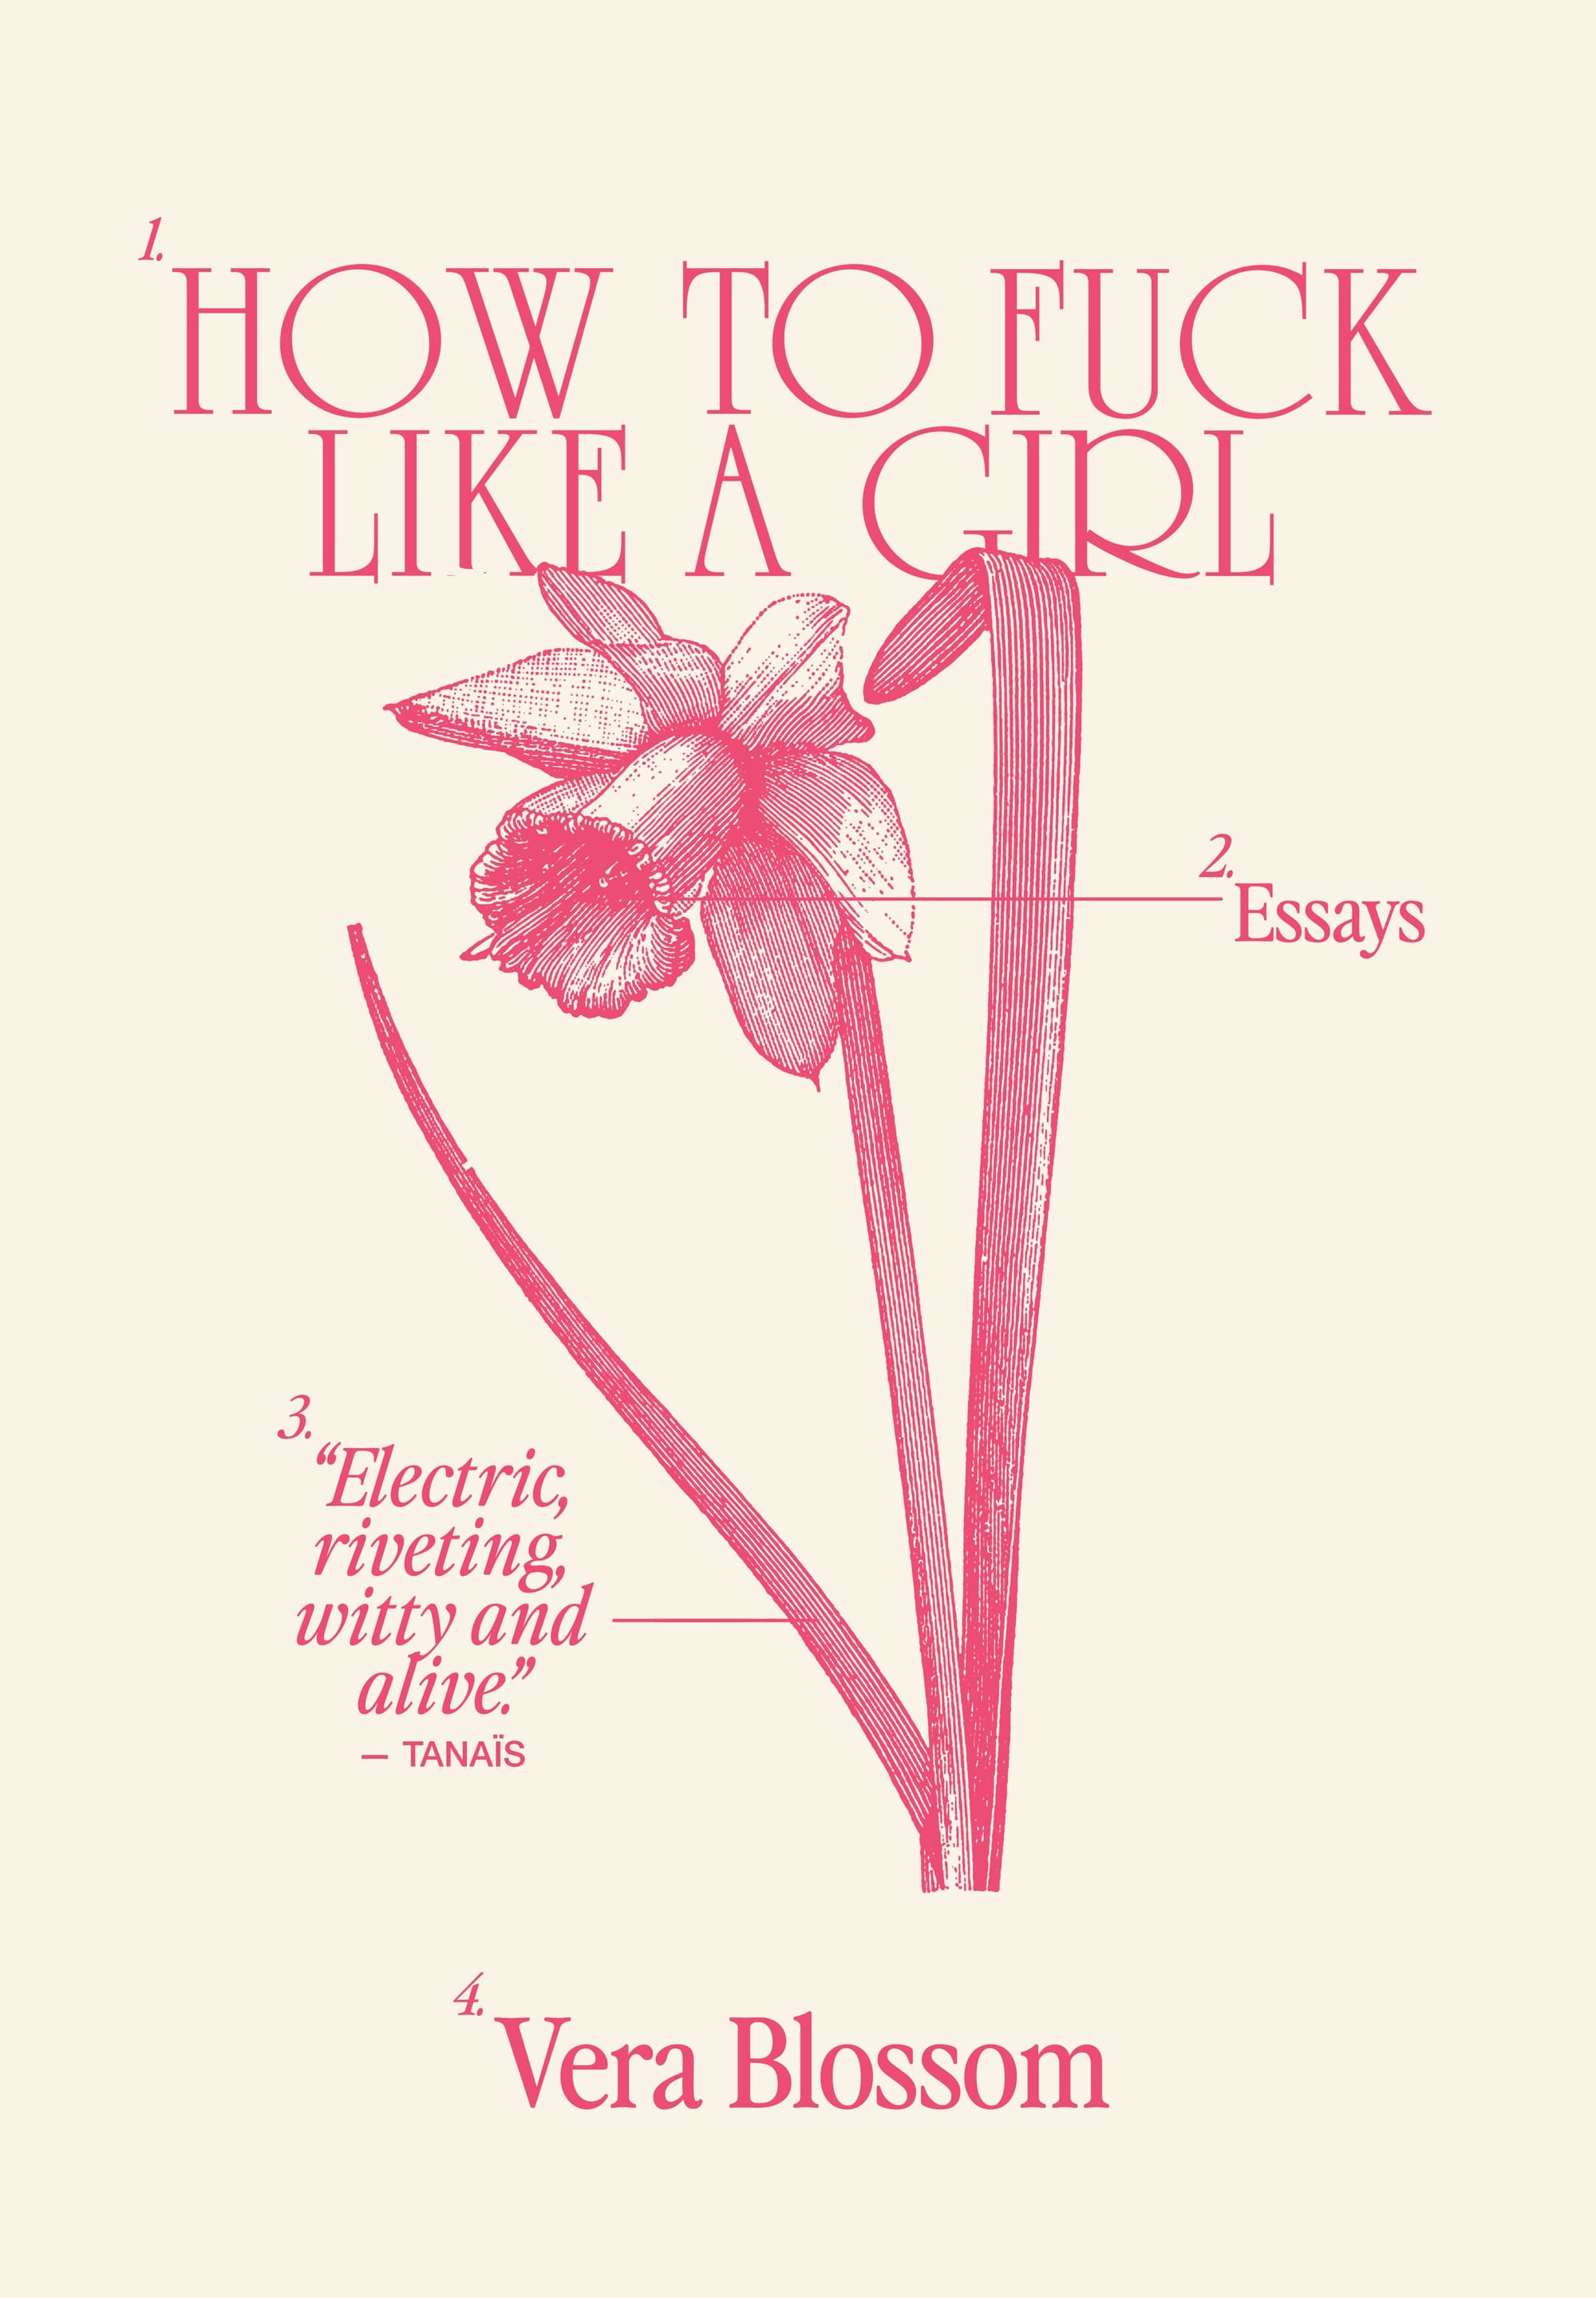 Book cover for How To Fuck Like a Girl: essays by Vera Blossom. Pink text on cream background. Scientific illustration of narcissus. Blurb from Tanaïs: "Electric, riveting, witty and alive."